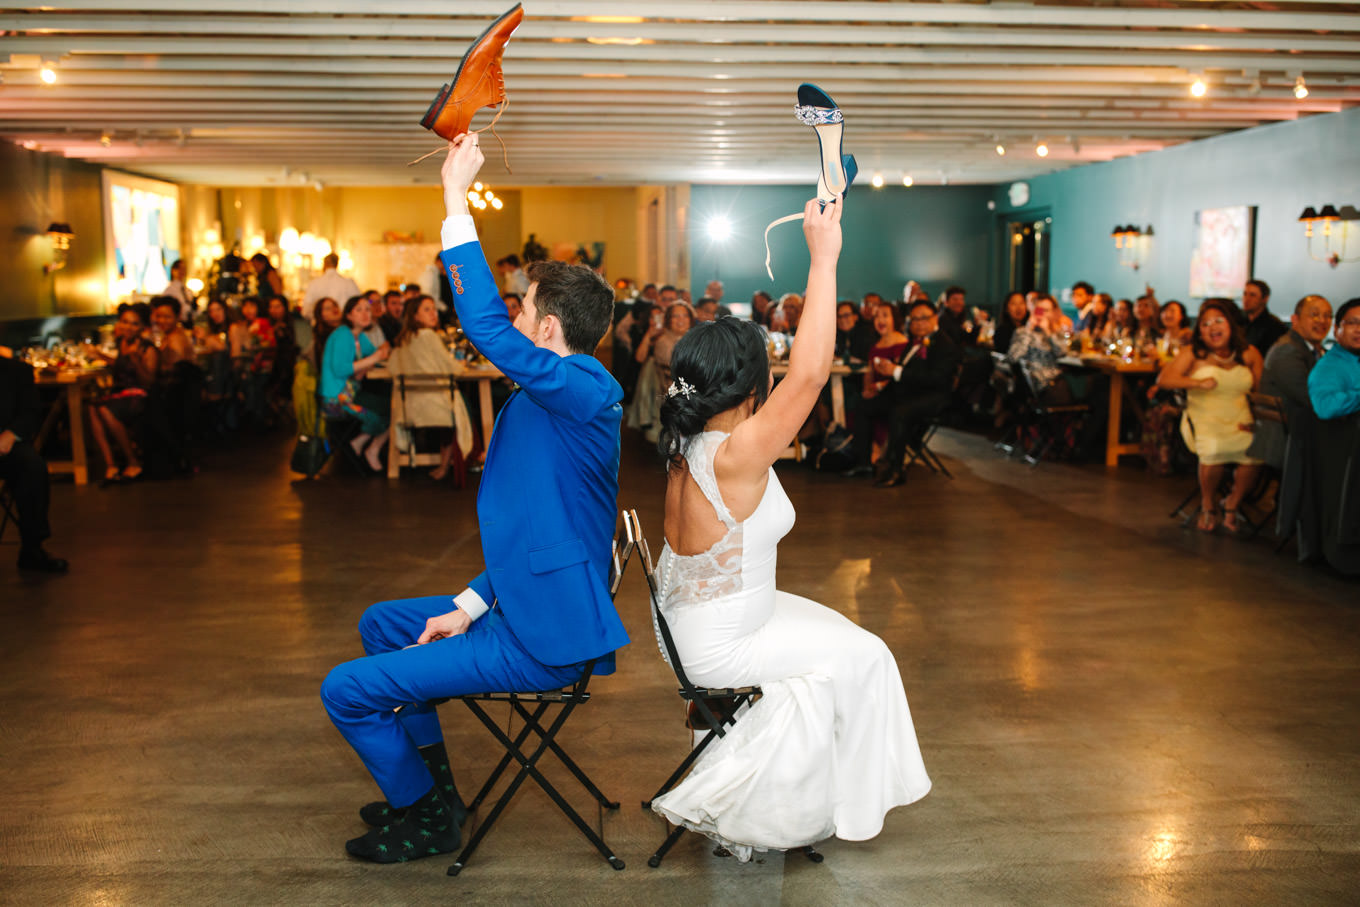 Shoe game at wedding reception | TV inspired wedding at The Fig House Los Angeles | Published on The Knot | Fresh and colorful photography for fun-loving couples in Southern California | #losangeleswedding #TVwedding #colorfulwedding #theknot   Source: Mary Costa Photography | Los Angeles wedding photographer